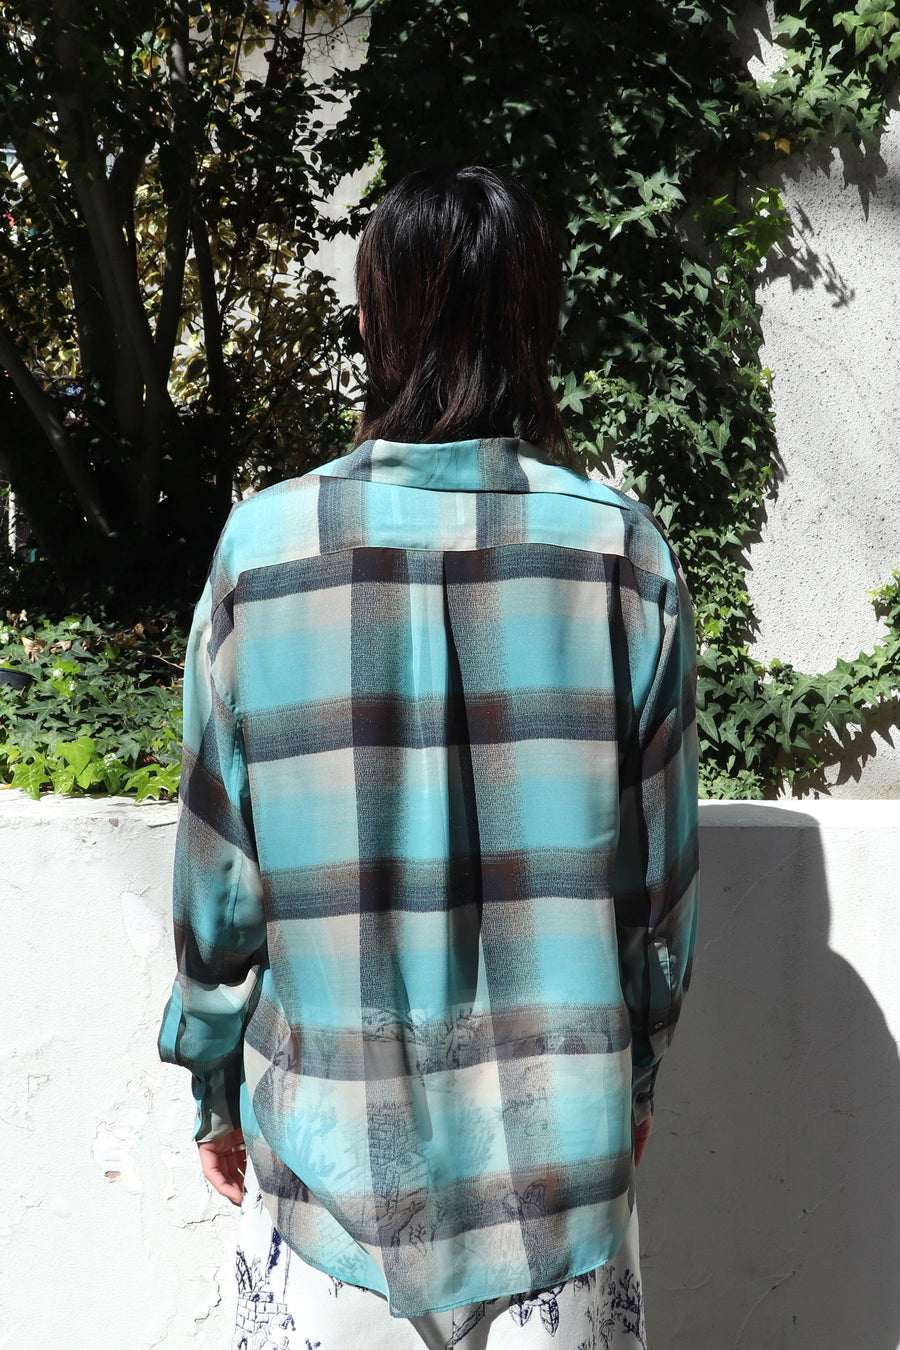 SUGARHILL  SHEER OMBRE PLAID BLOUSE(GREEN OMBRE)